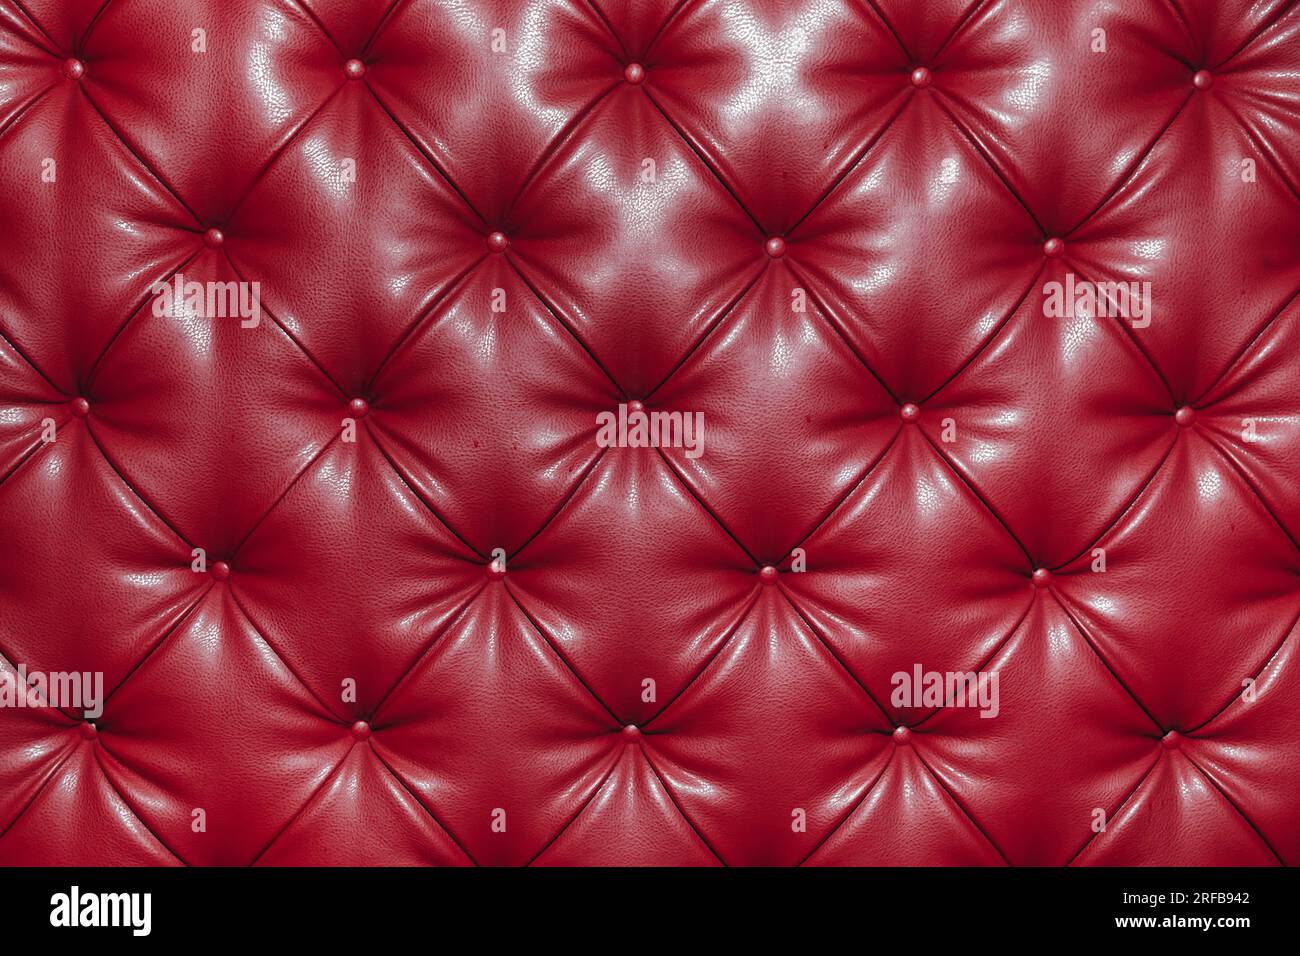 background pattern of red buttons of various size Stock Photo